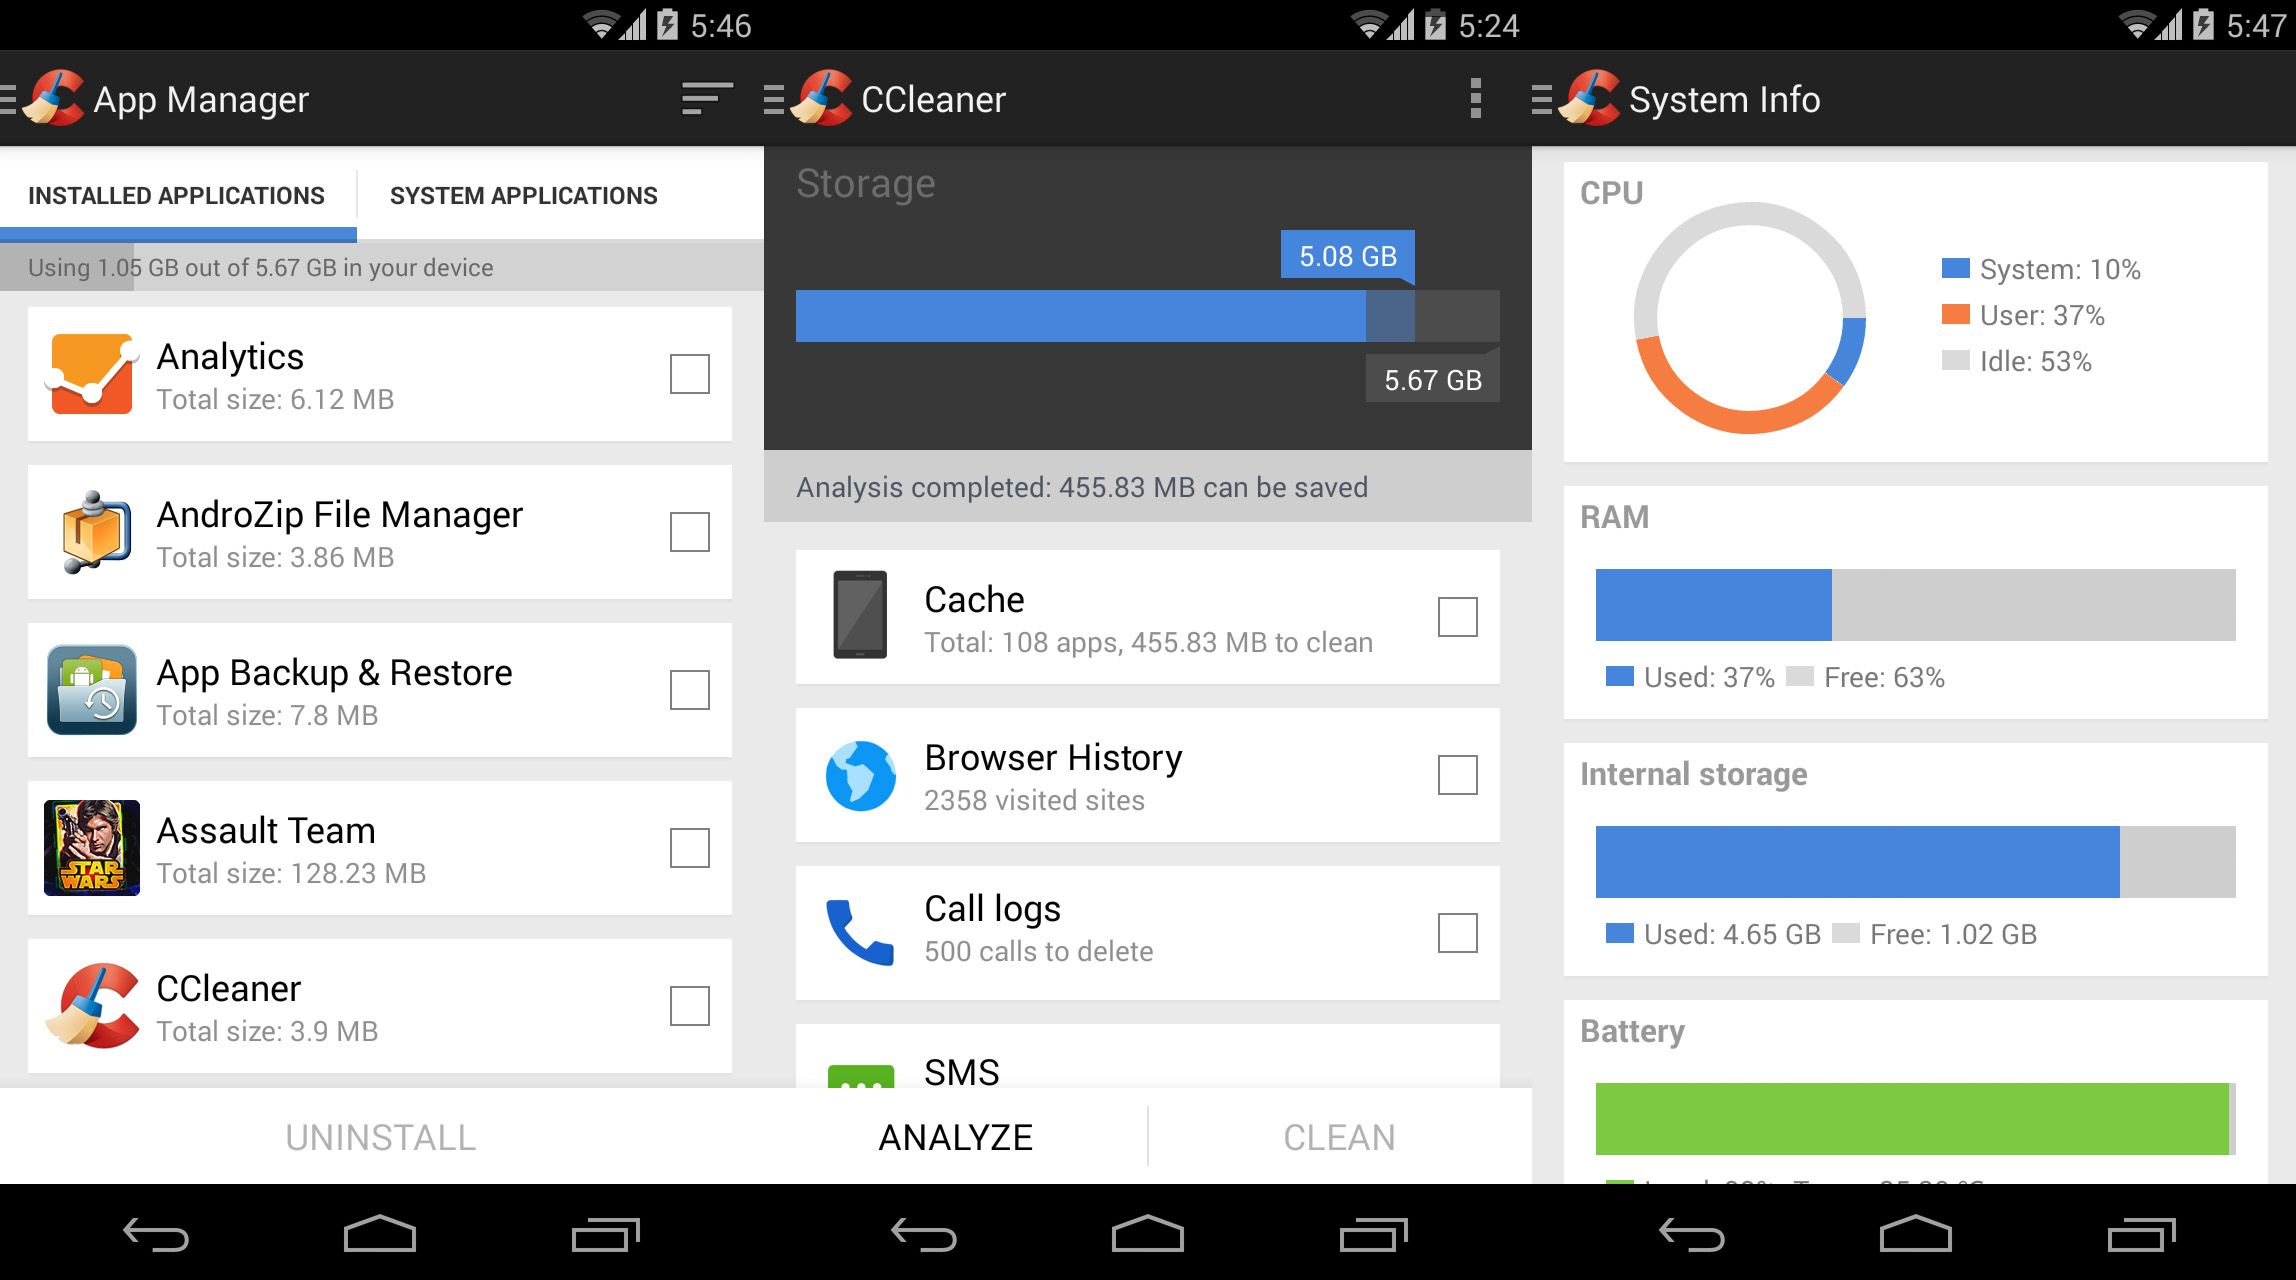 ccleaner update download free